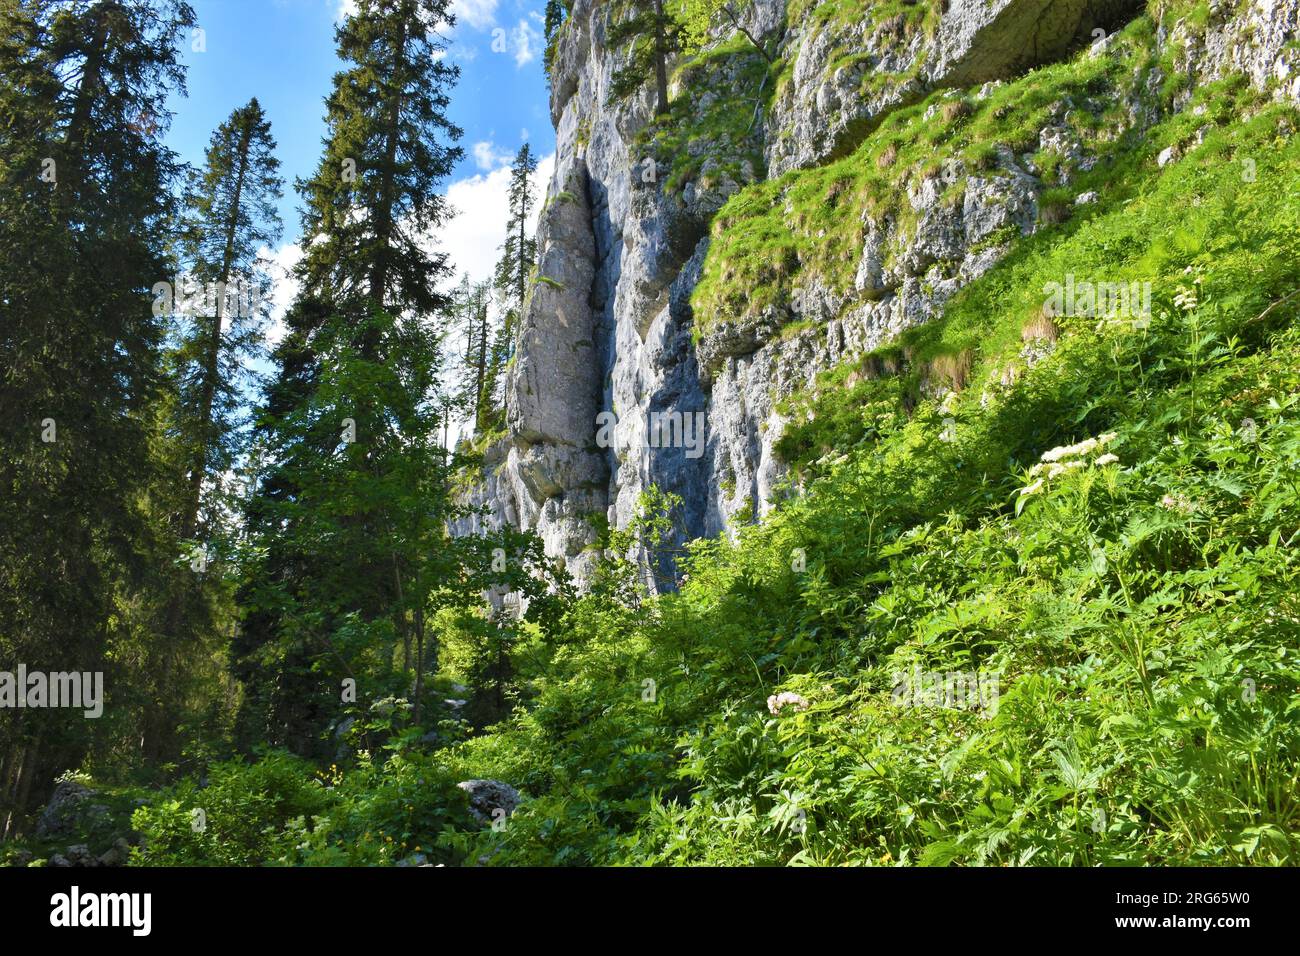 Alpine landscape with a meadow under a rock wall and spruce (Picea abies) trees in Julian alps and Triglav national park, Slovenia Stock Photo